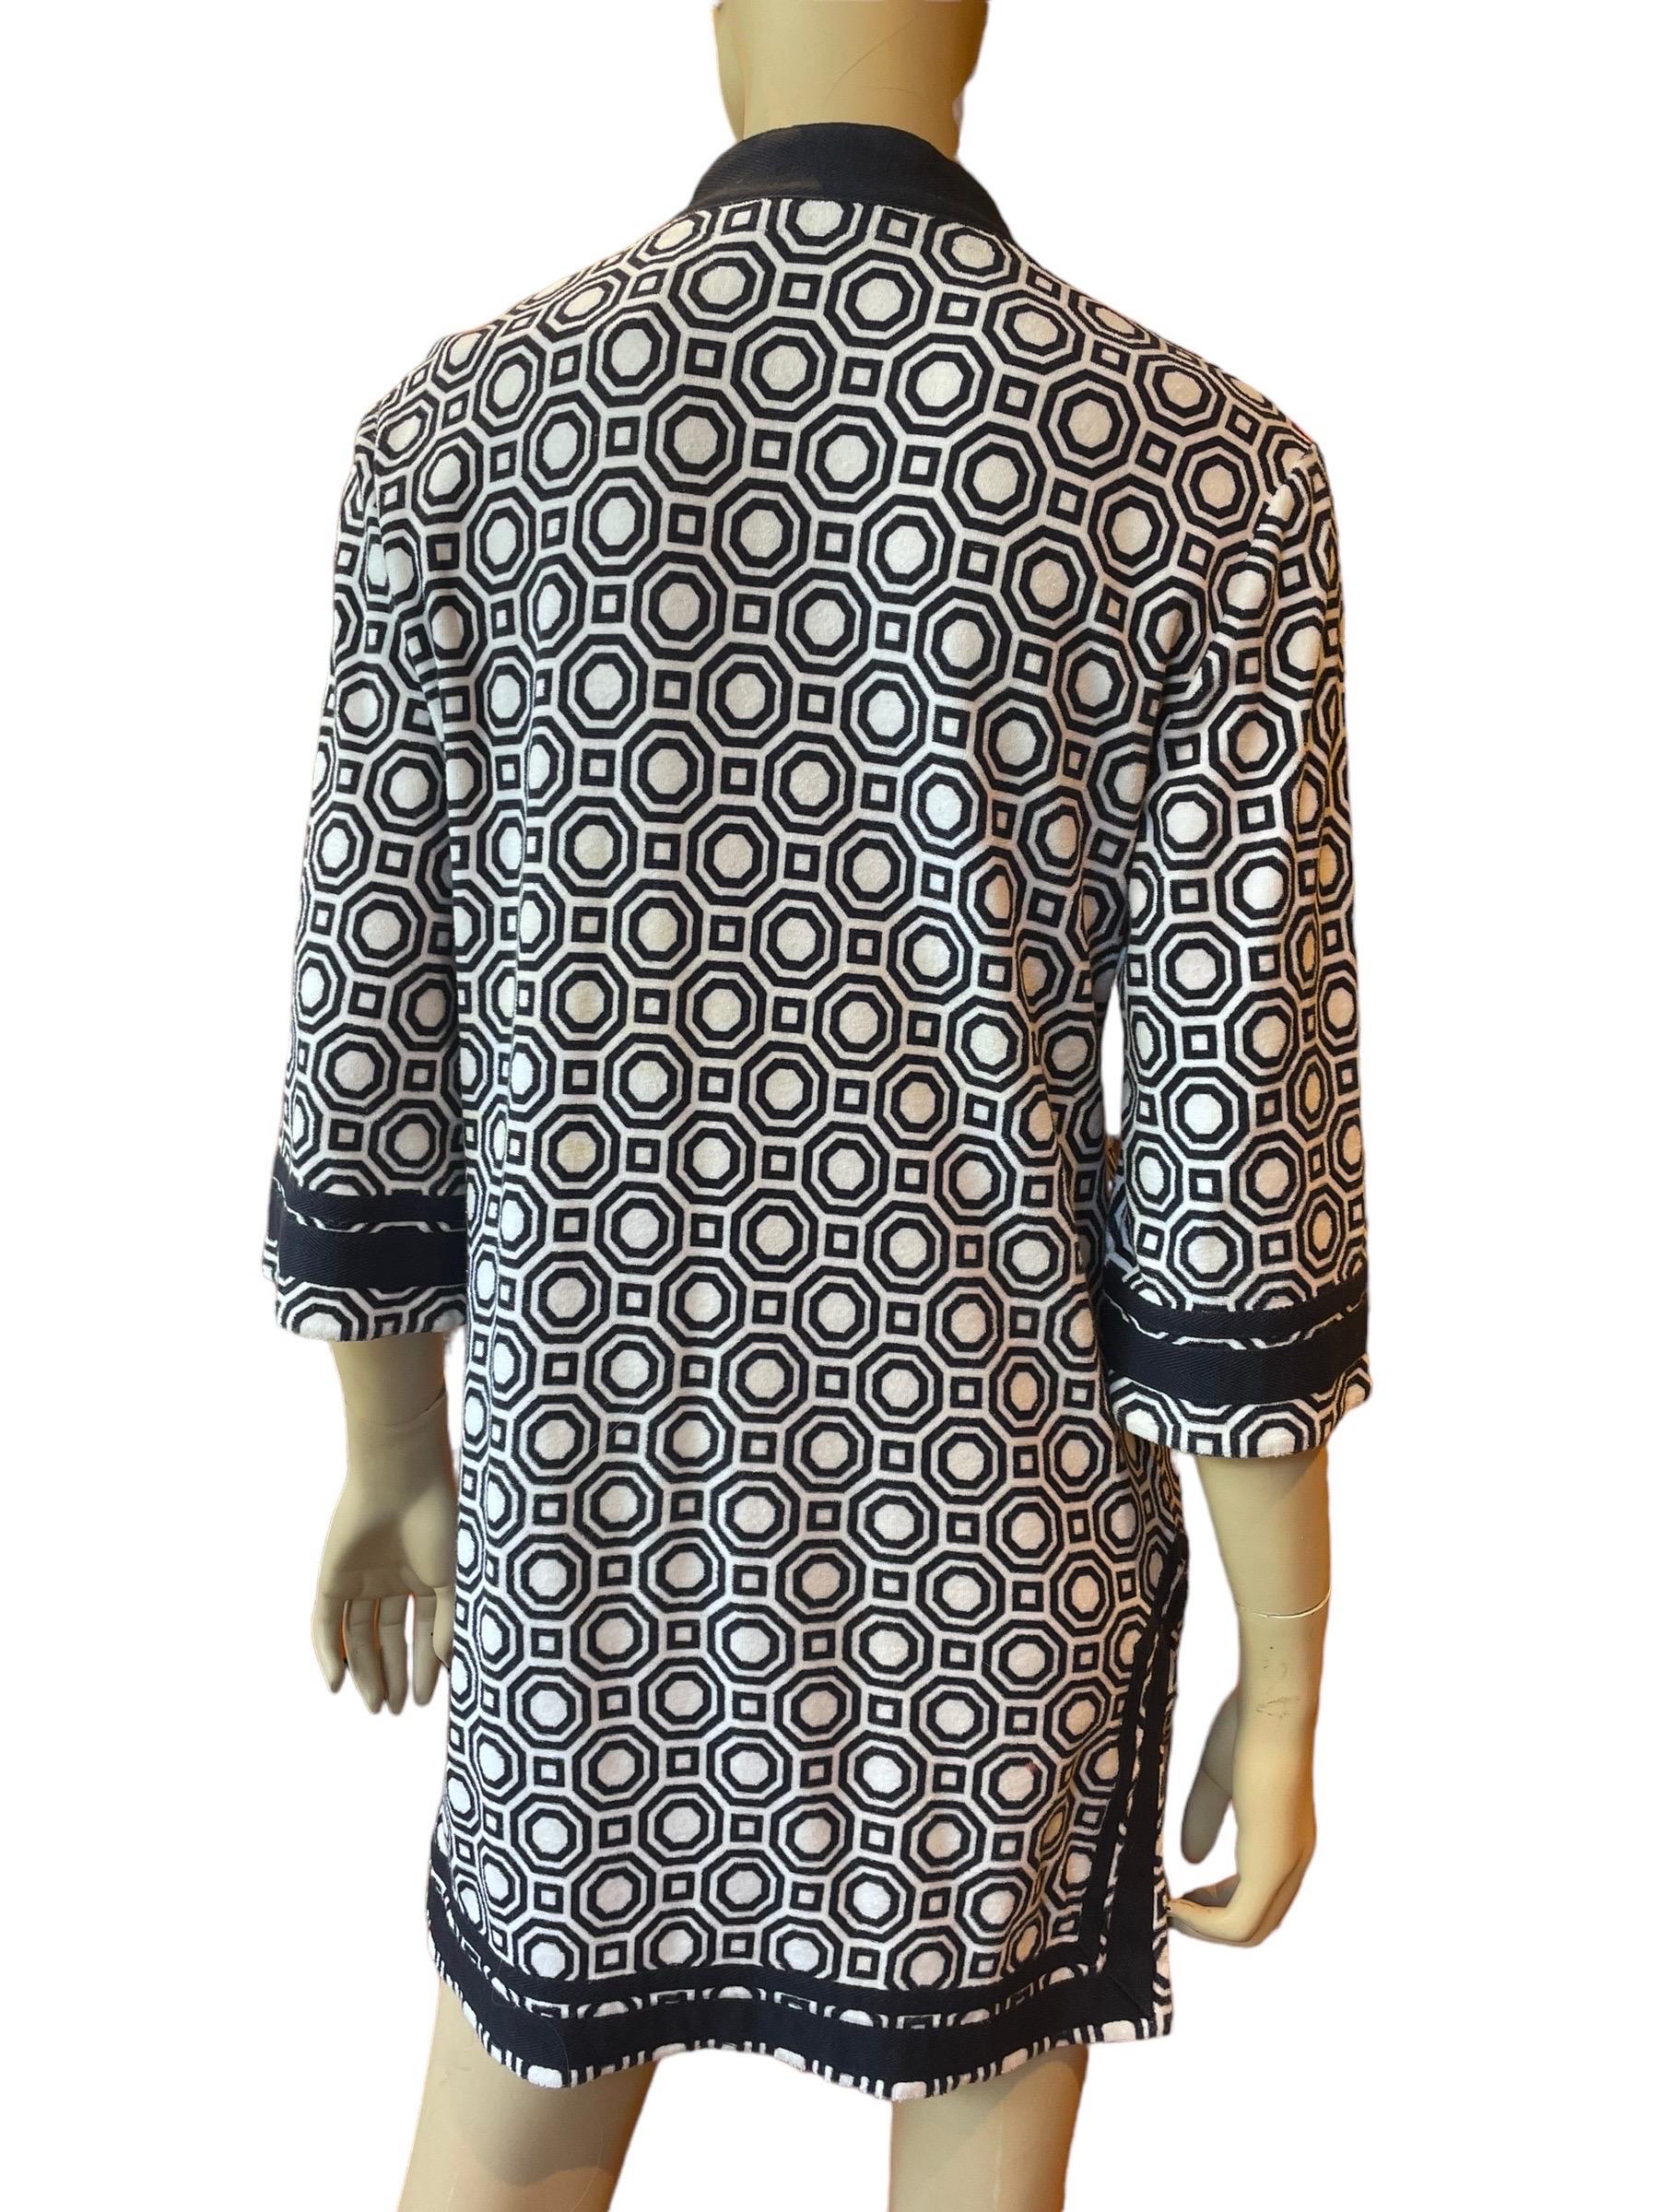 Y2K Tory Burch Terry Towel Dress  In Good Condition For Sale In Greenport, NY